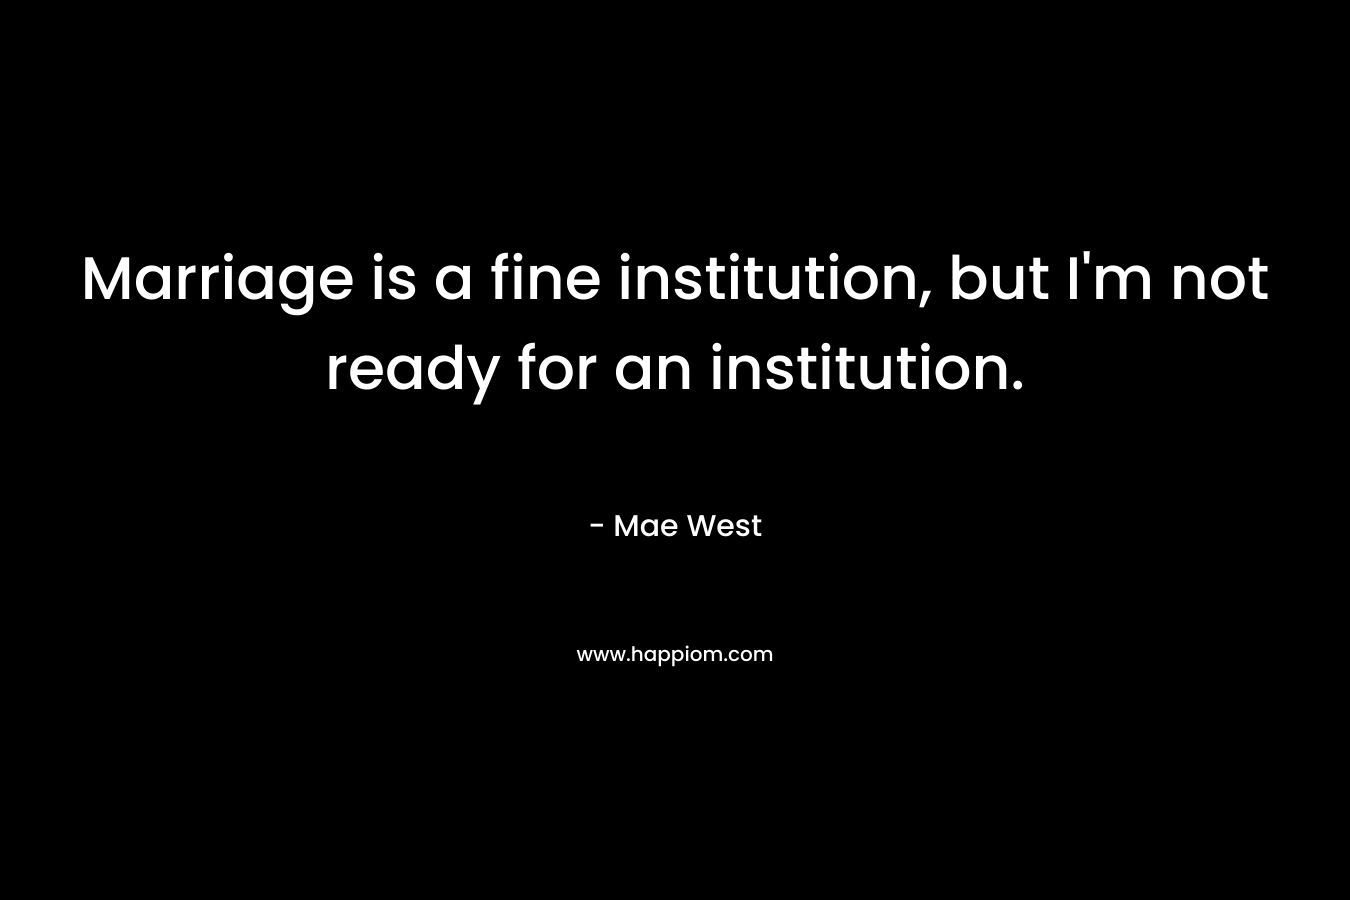 Marriage is a fine institution, but I'm not ready for an institution.